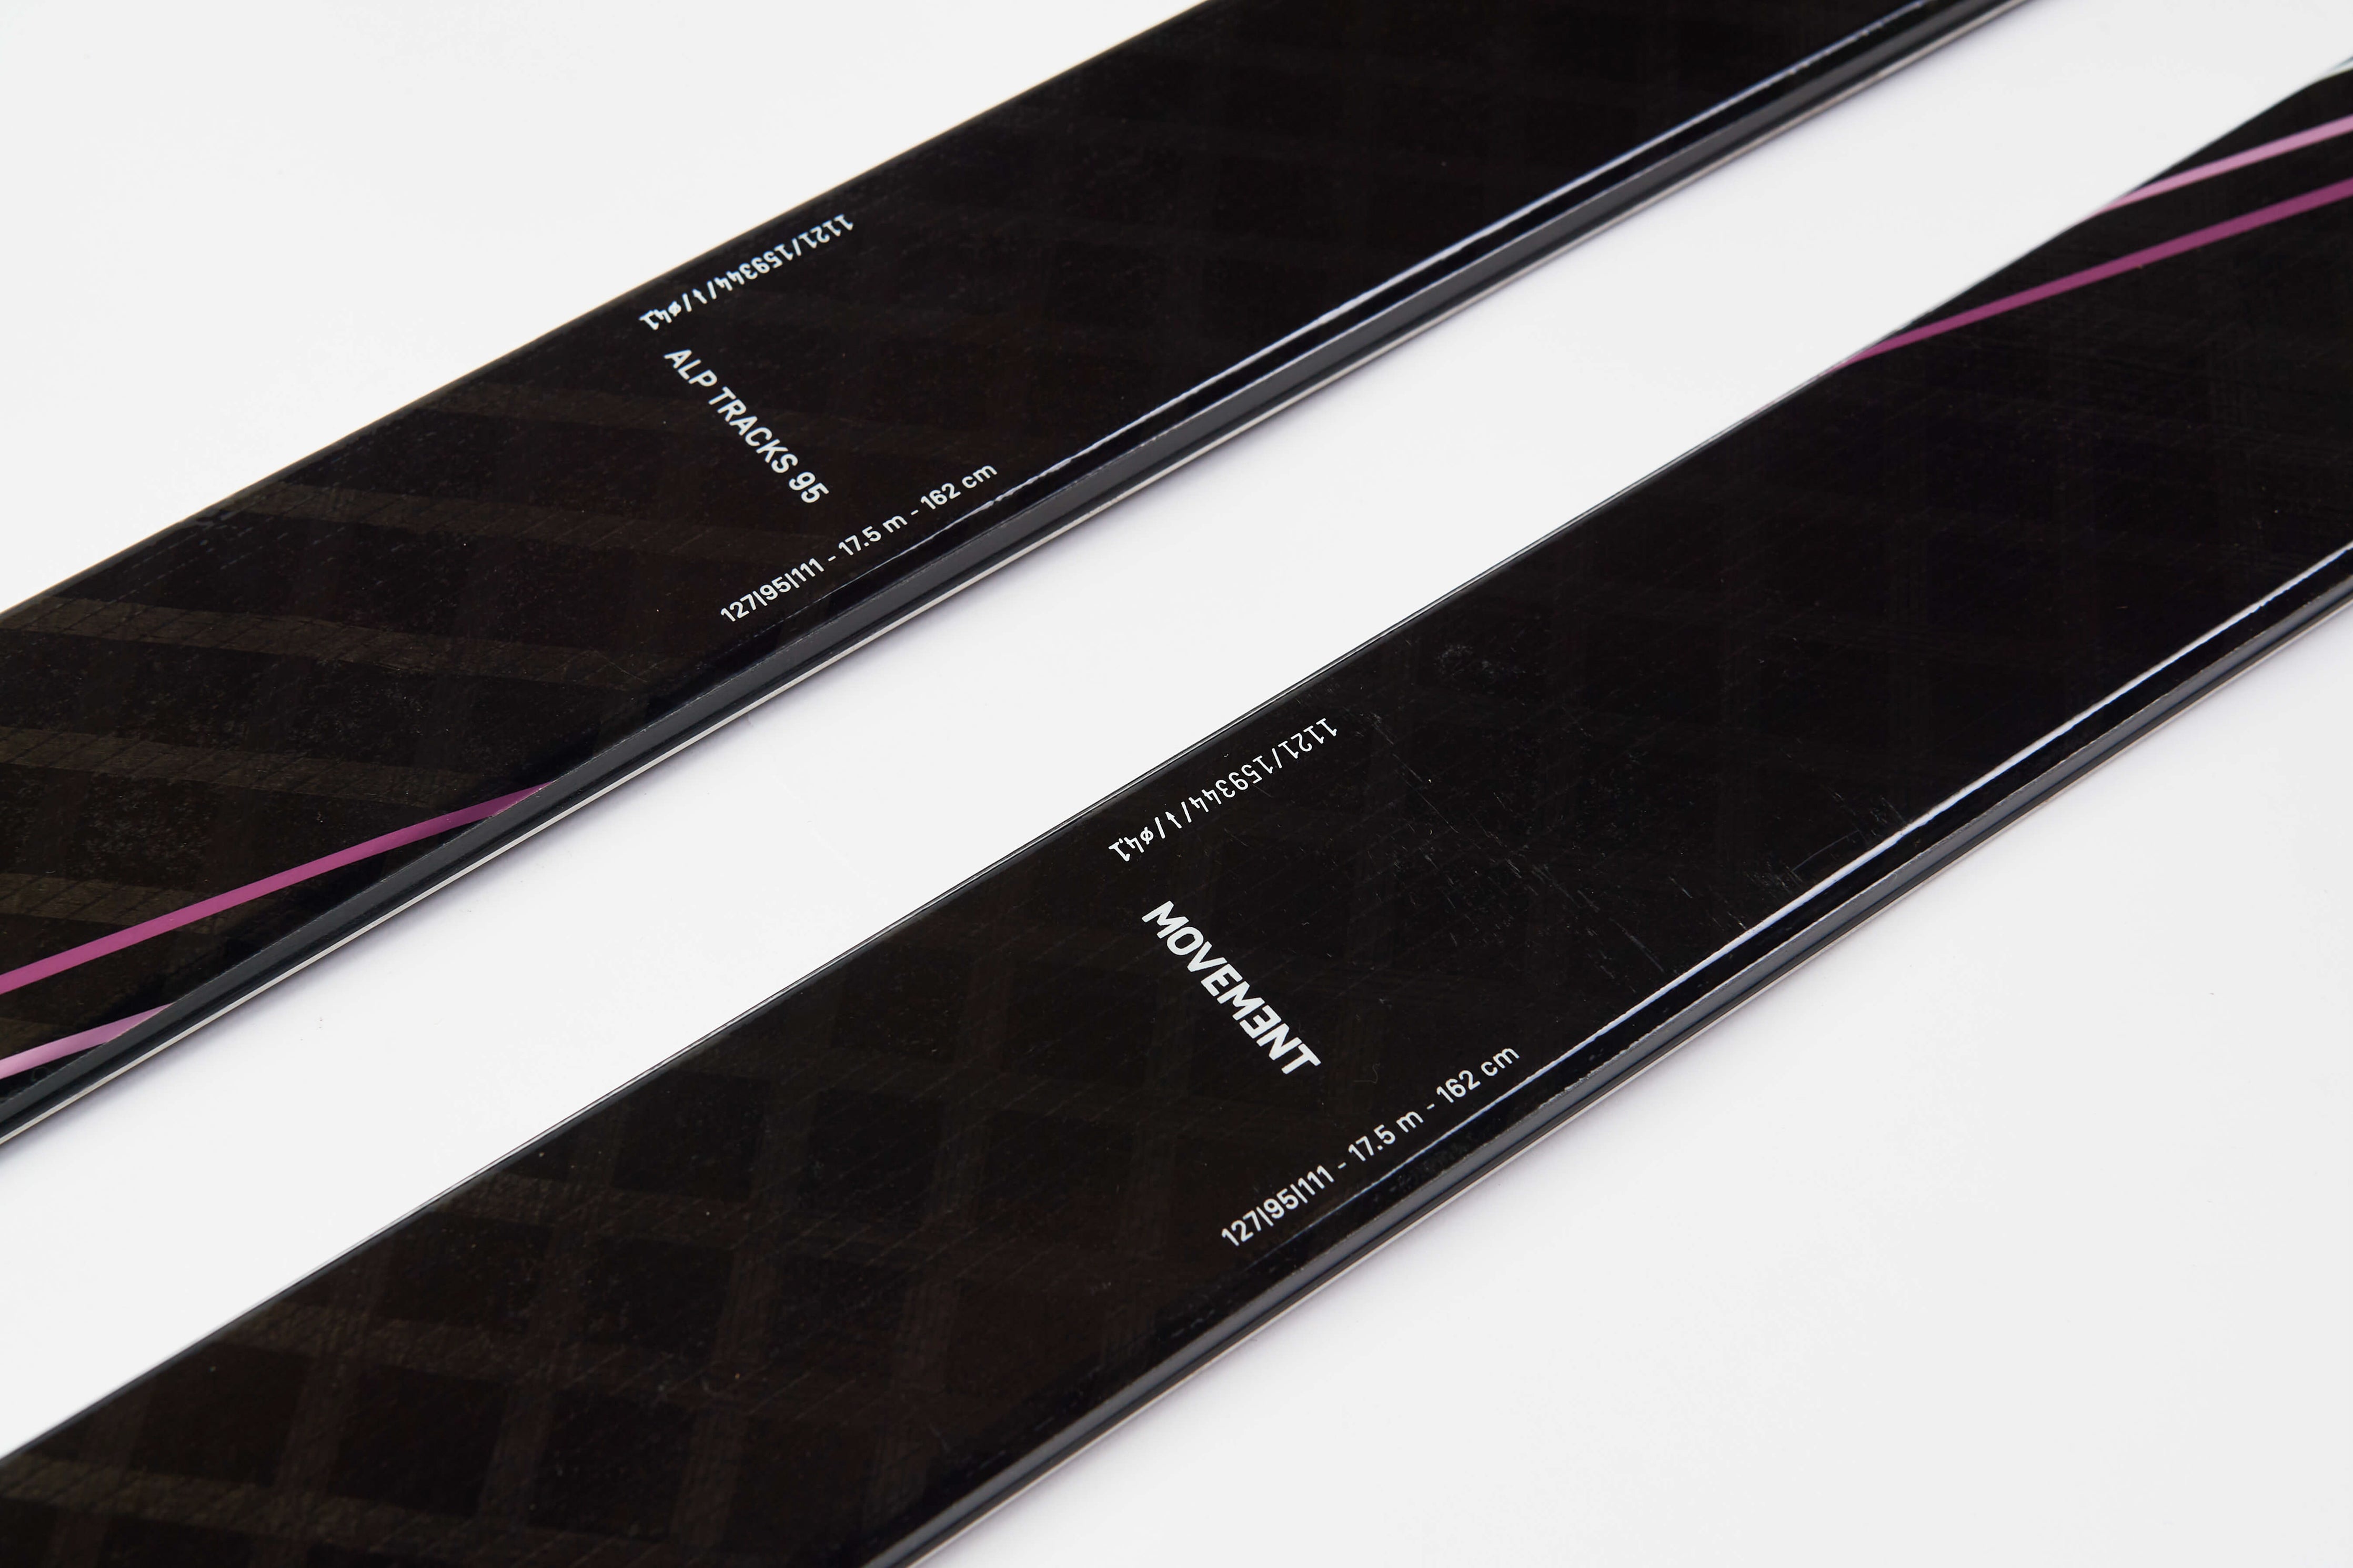 Explore new horizons with Movement&#39;s Alp Tracks 95 Women&#39;s touring skis by my side.